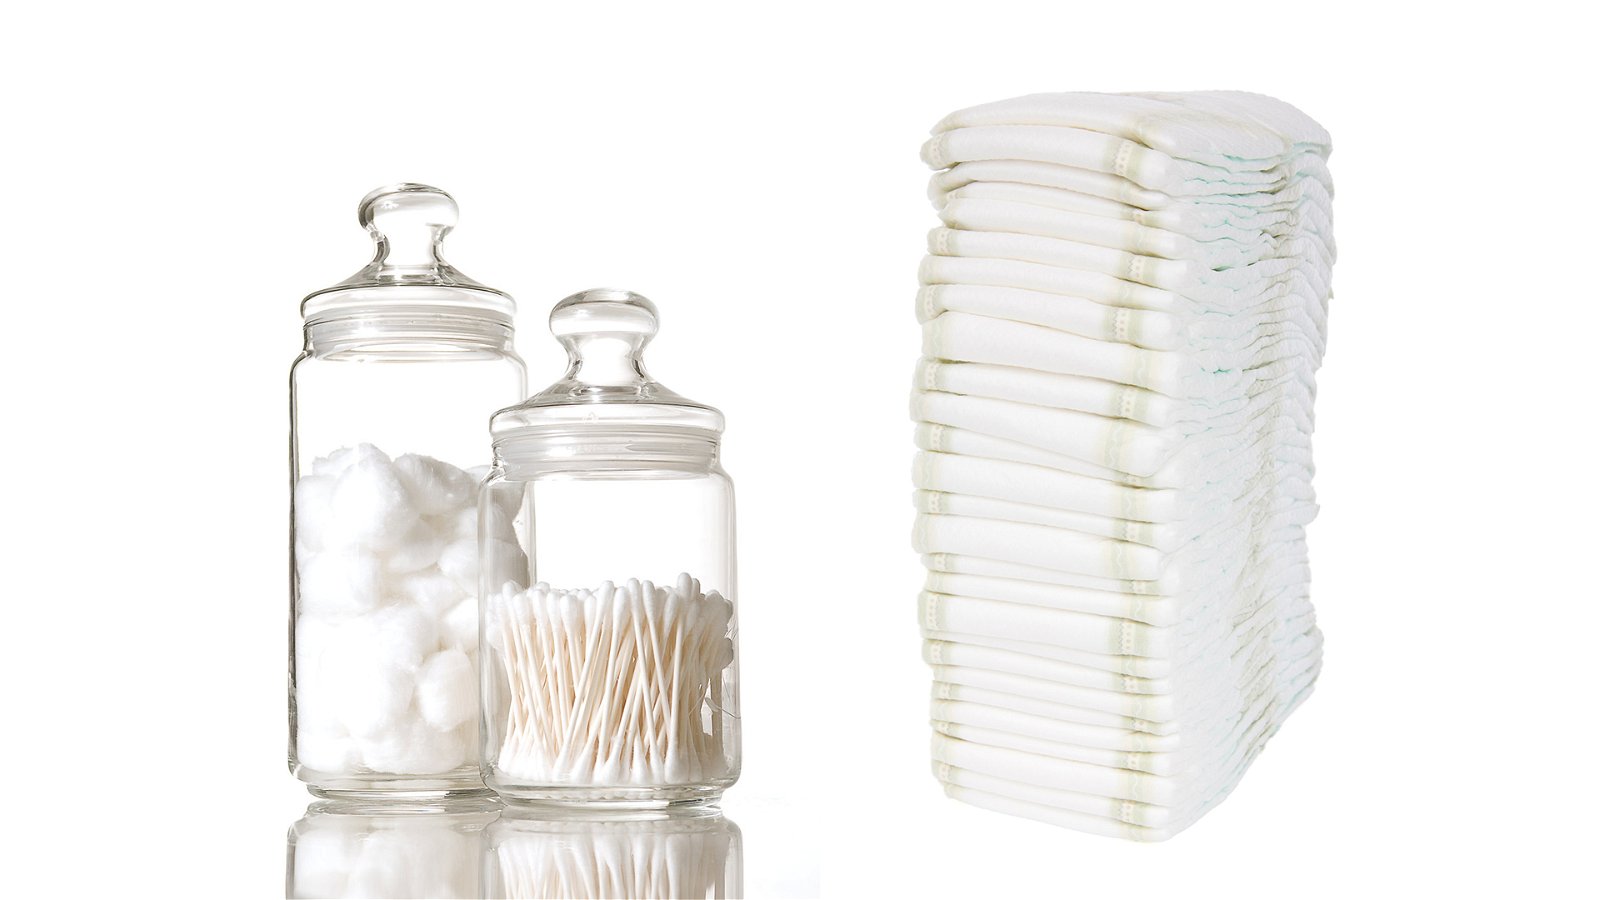 disposable cotton products